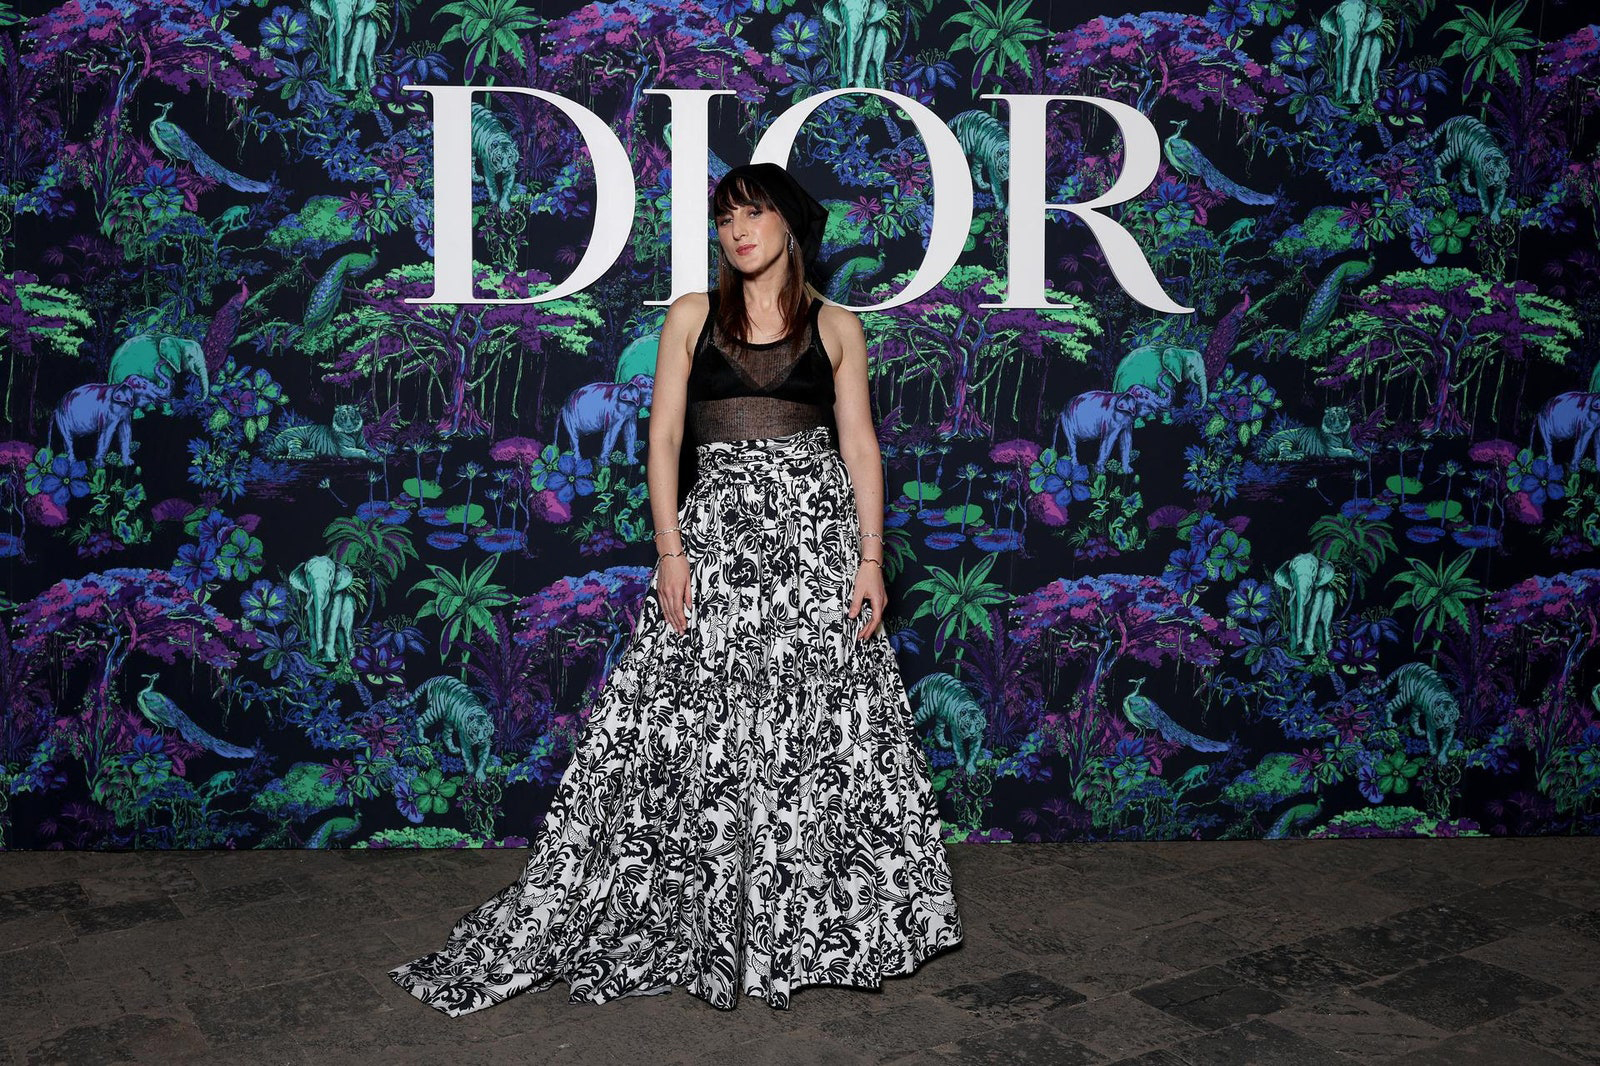 Dior Fall/Winter 2023 Show In Mumbai Juliette Armanet wore a Dior Cruise 2023 black knit top with a printed black and white silk crepe skirt.